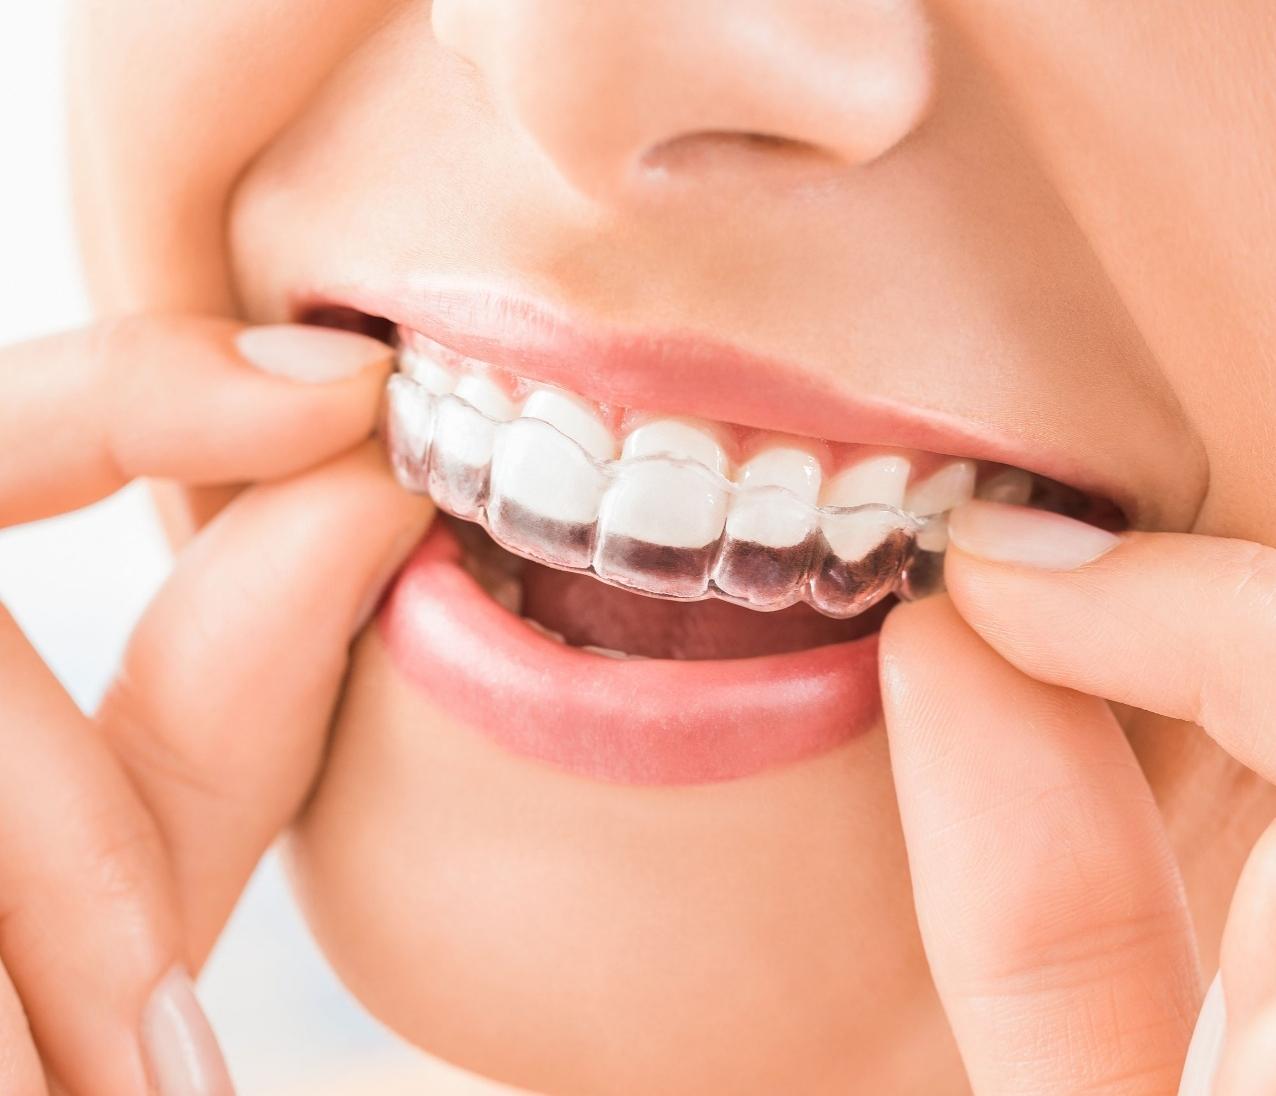 Aligners are also called Invisible braces